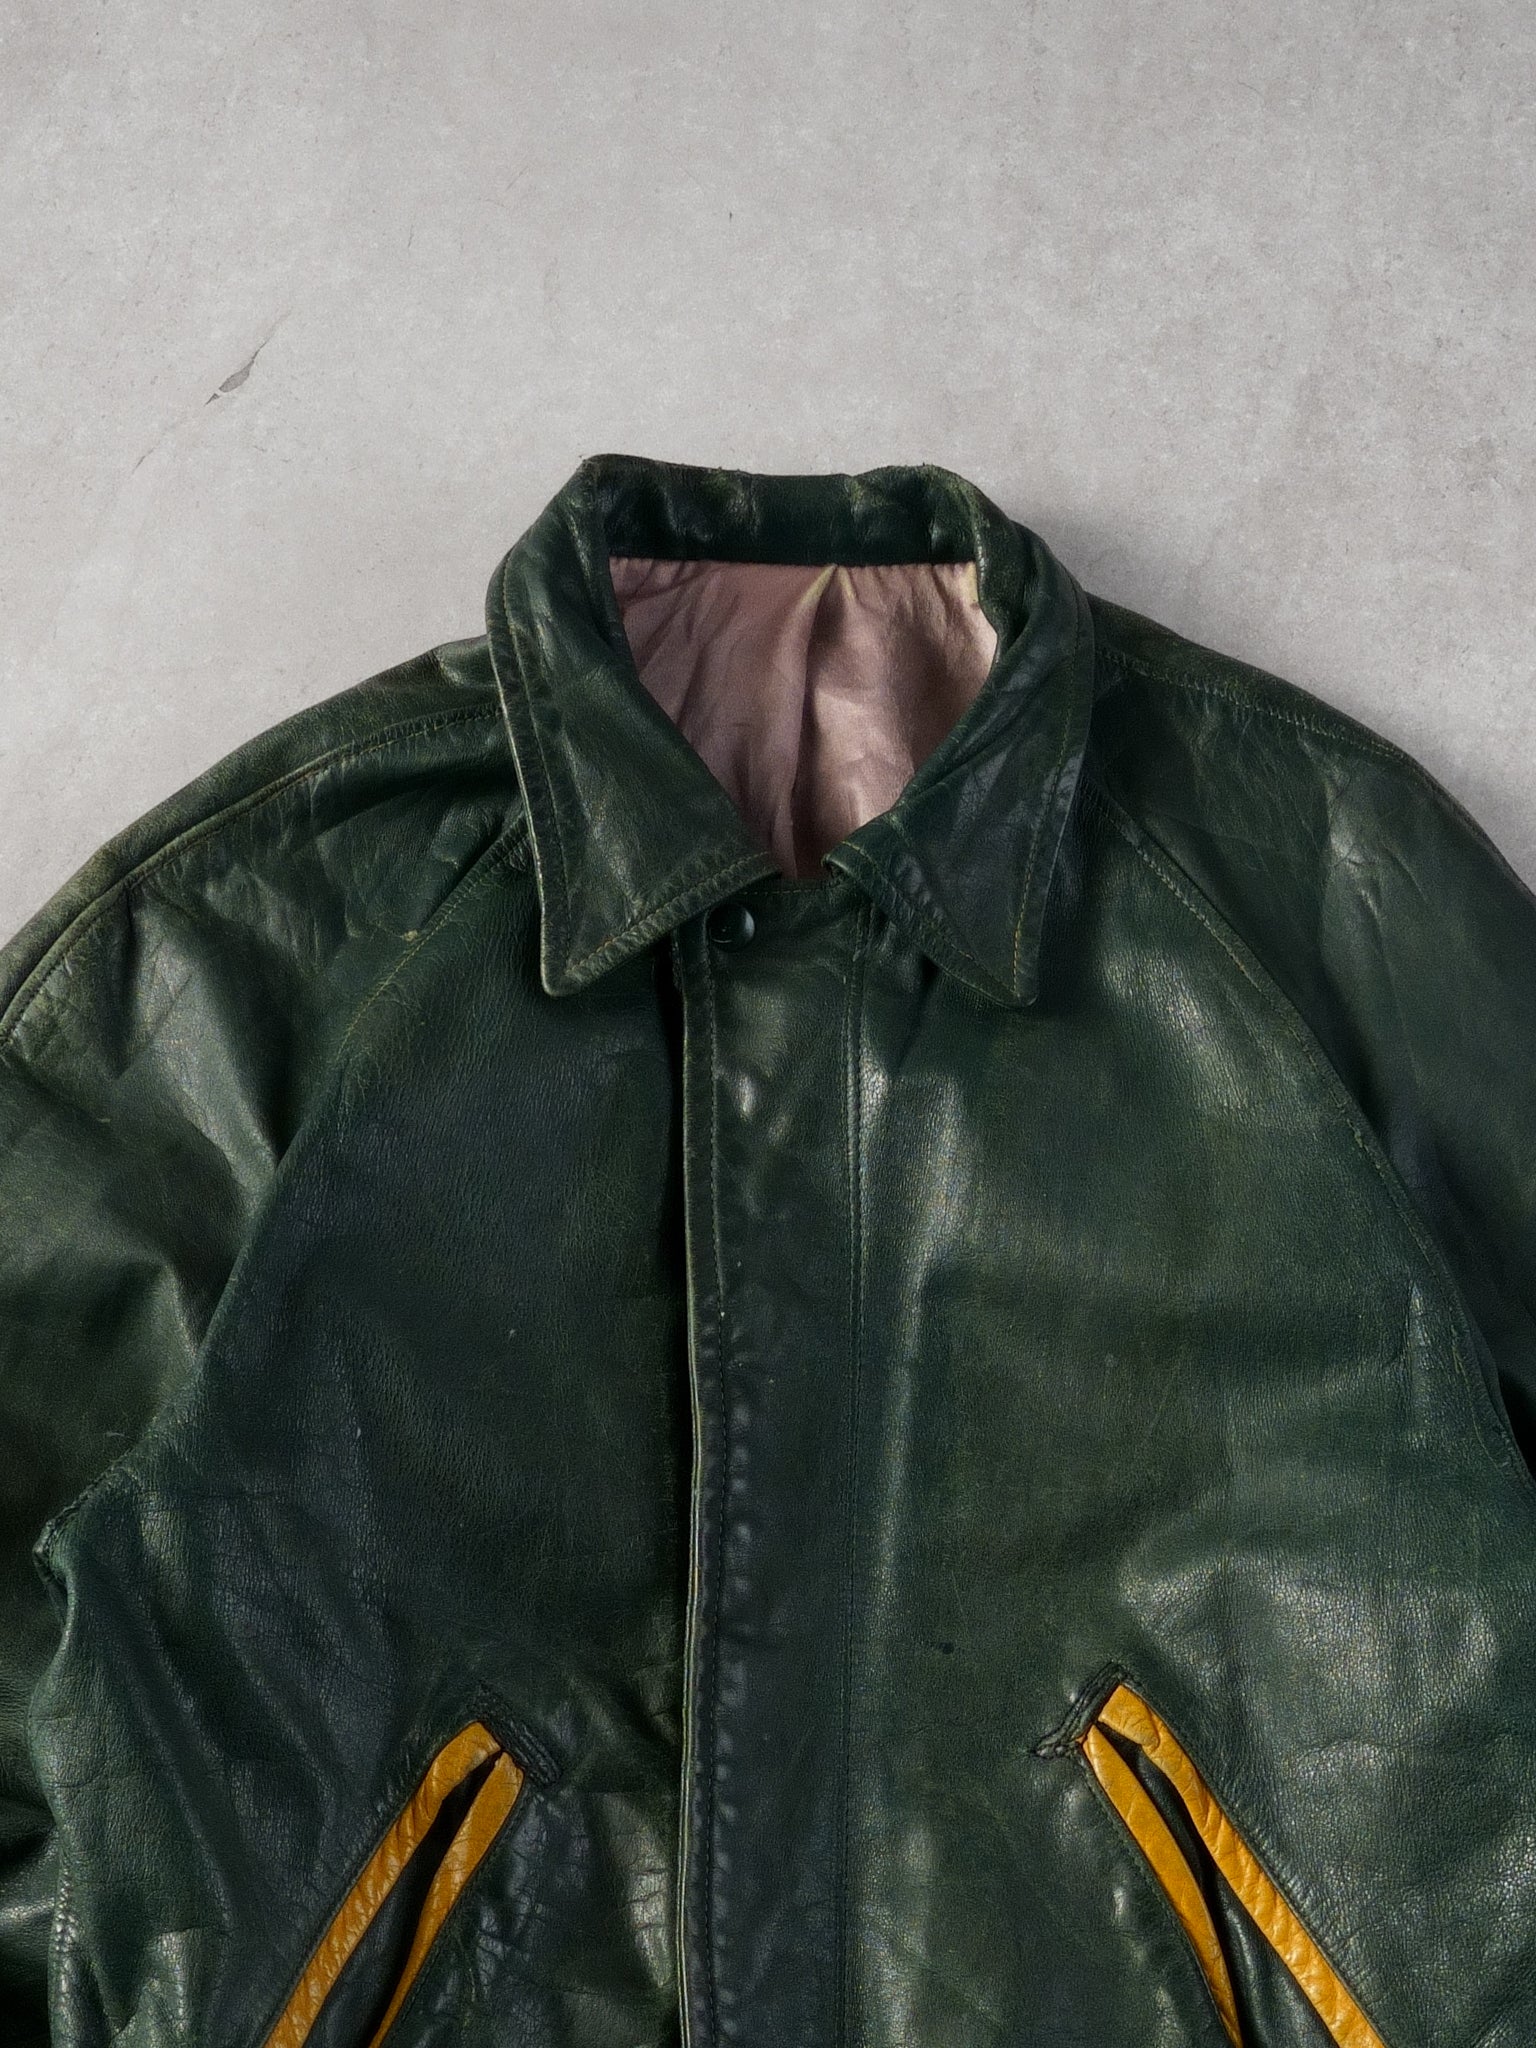 Vintage 70s Pine Green and Yellow Collared Leather Jacket (M)